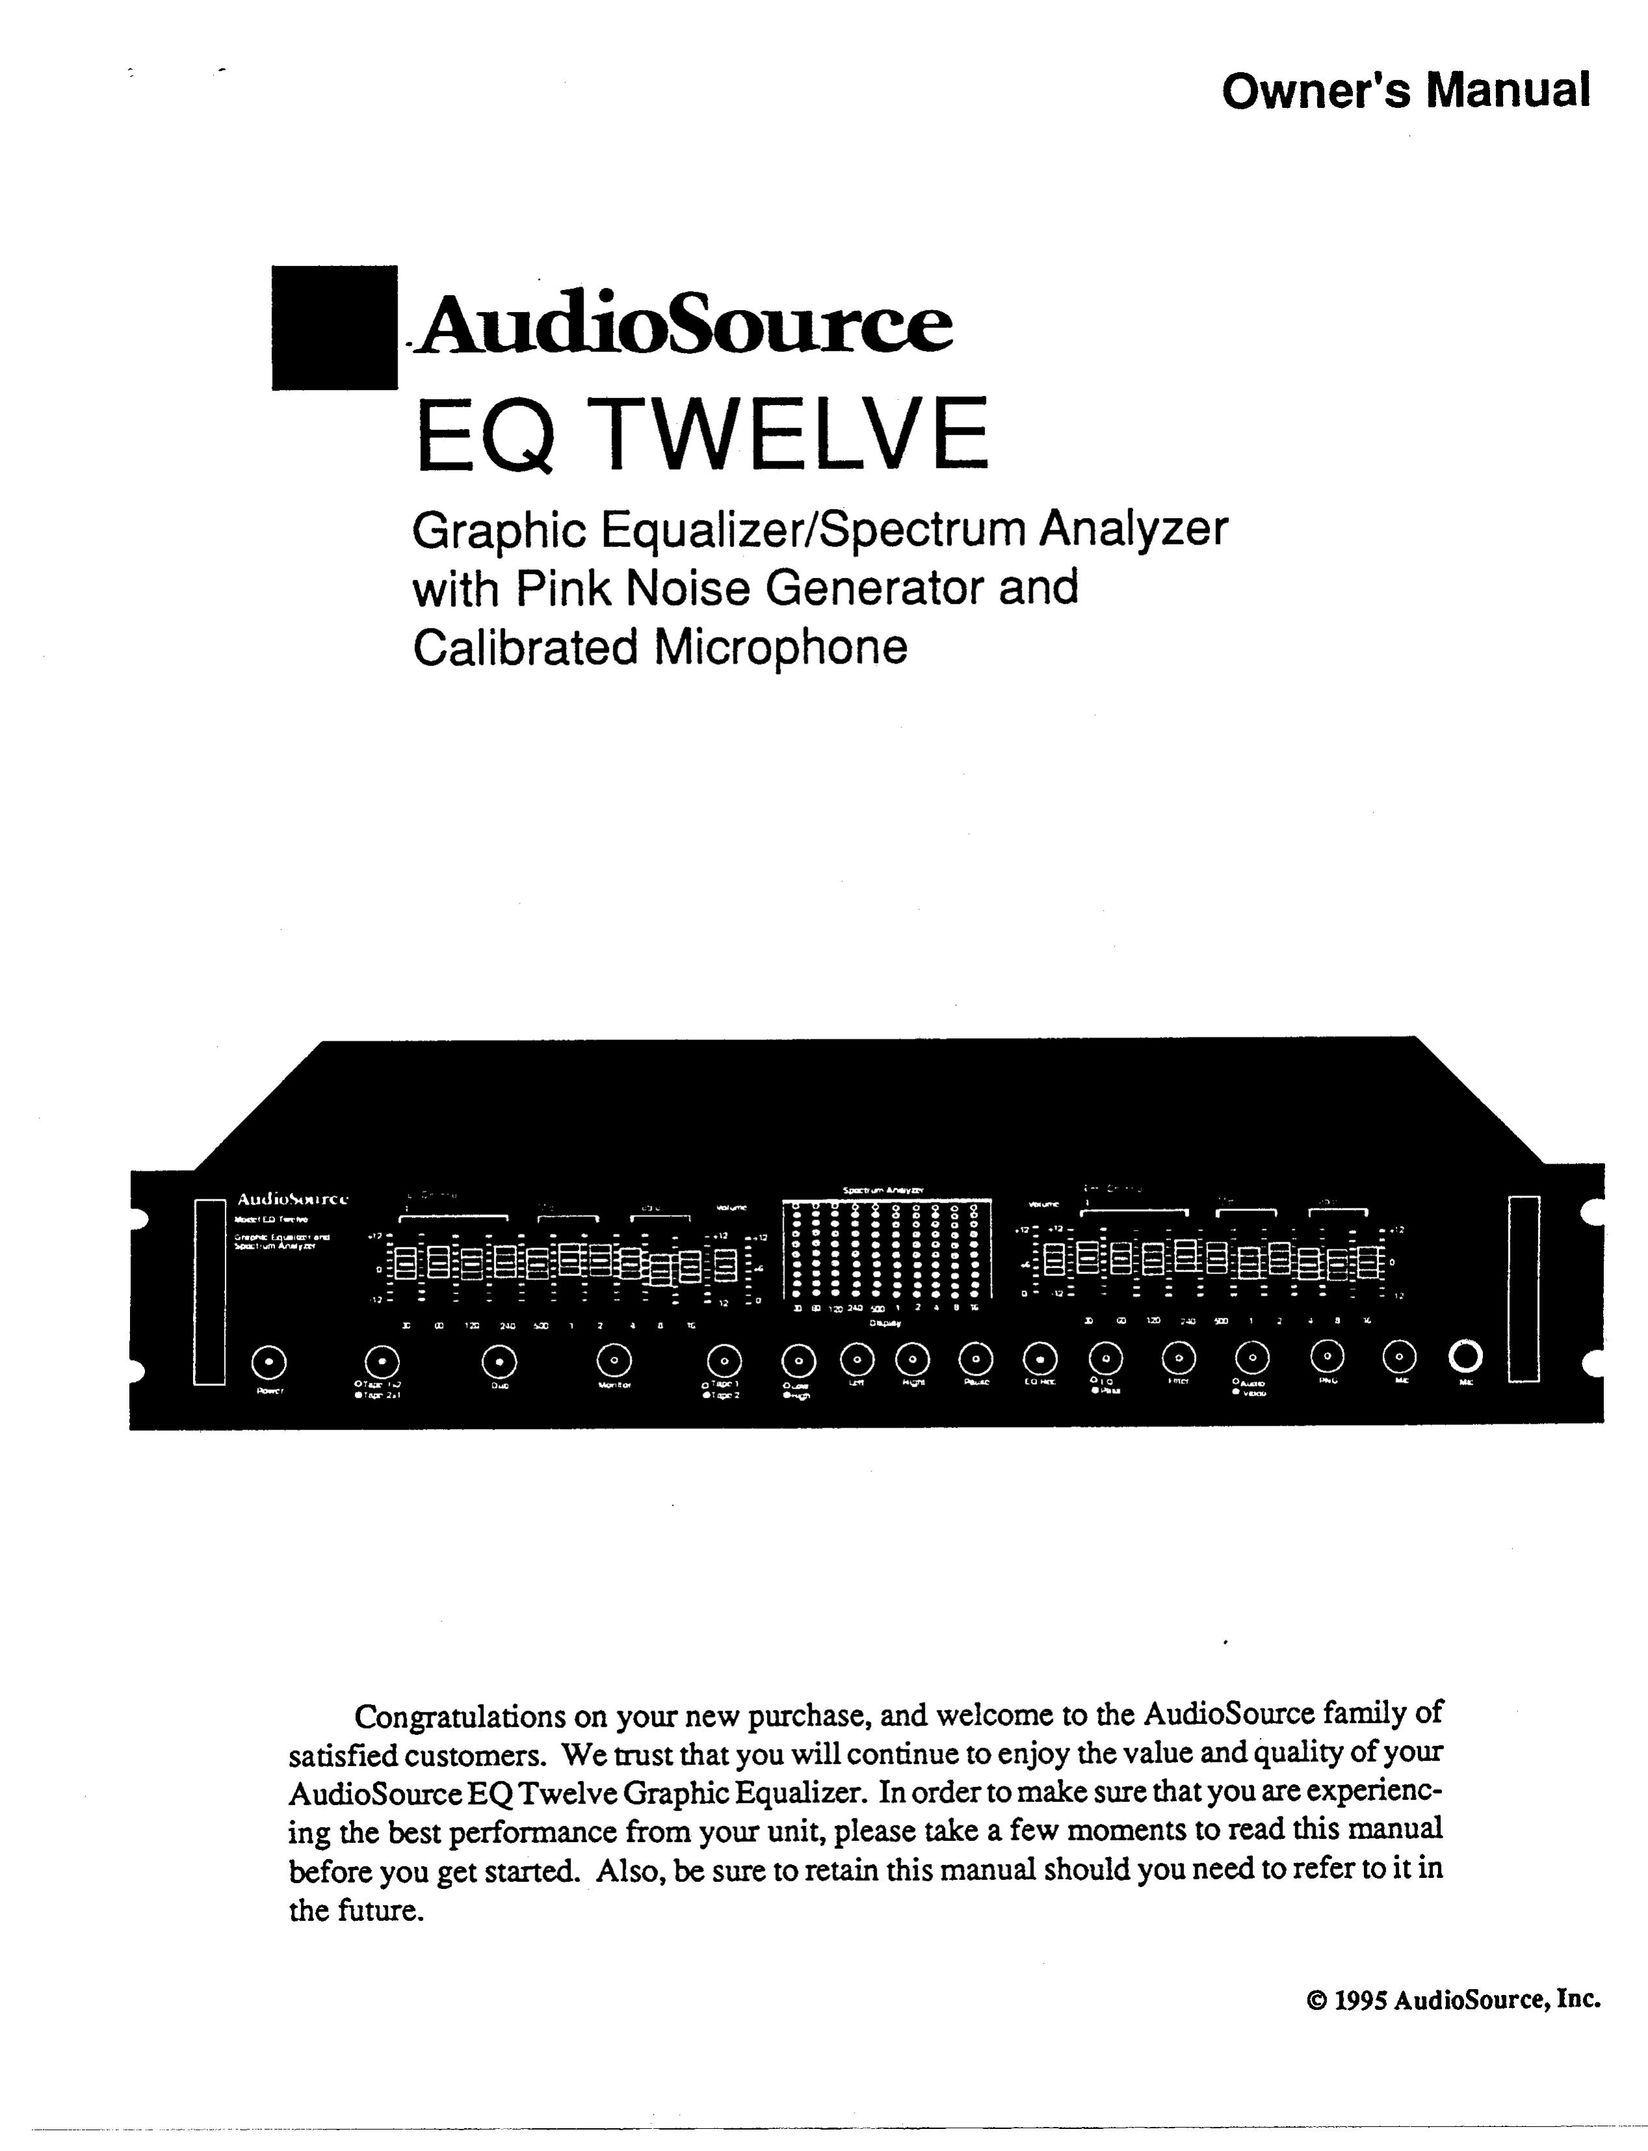 AudioSource Graphic Equalizer/Spectrum Analyzer with Pink Noise Generator and Calibrated Microphone Graphics Tablet User Manual